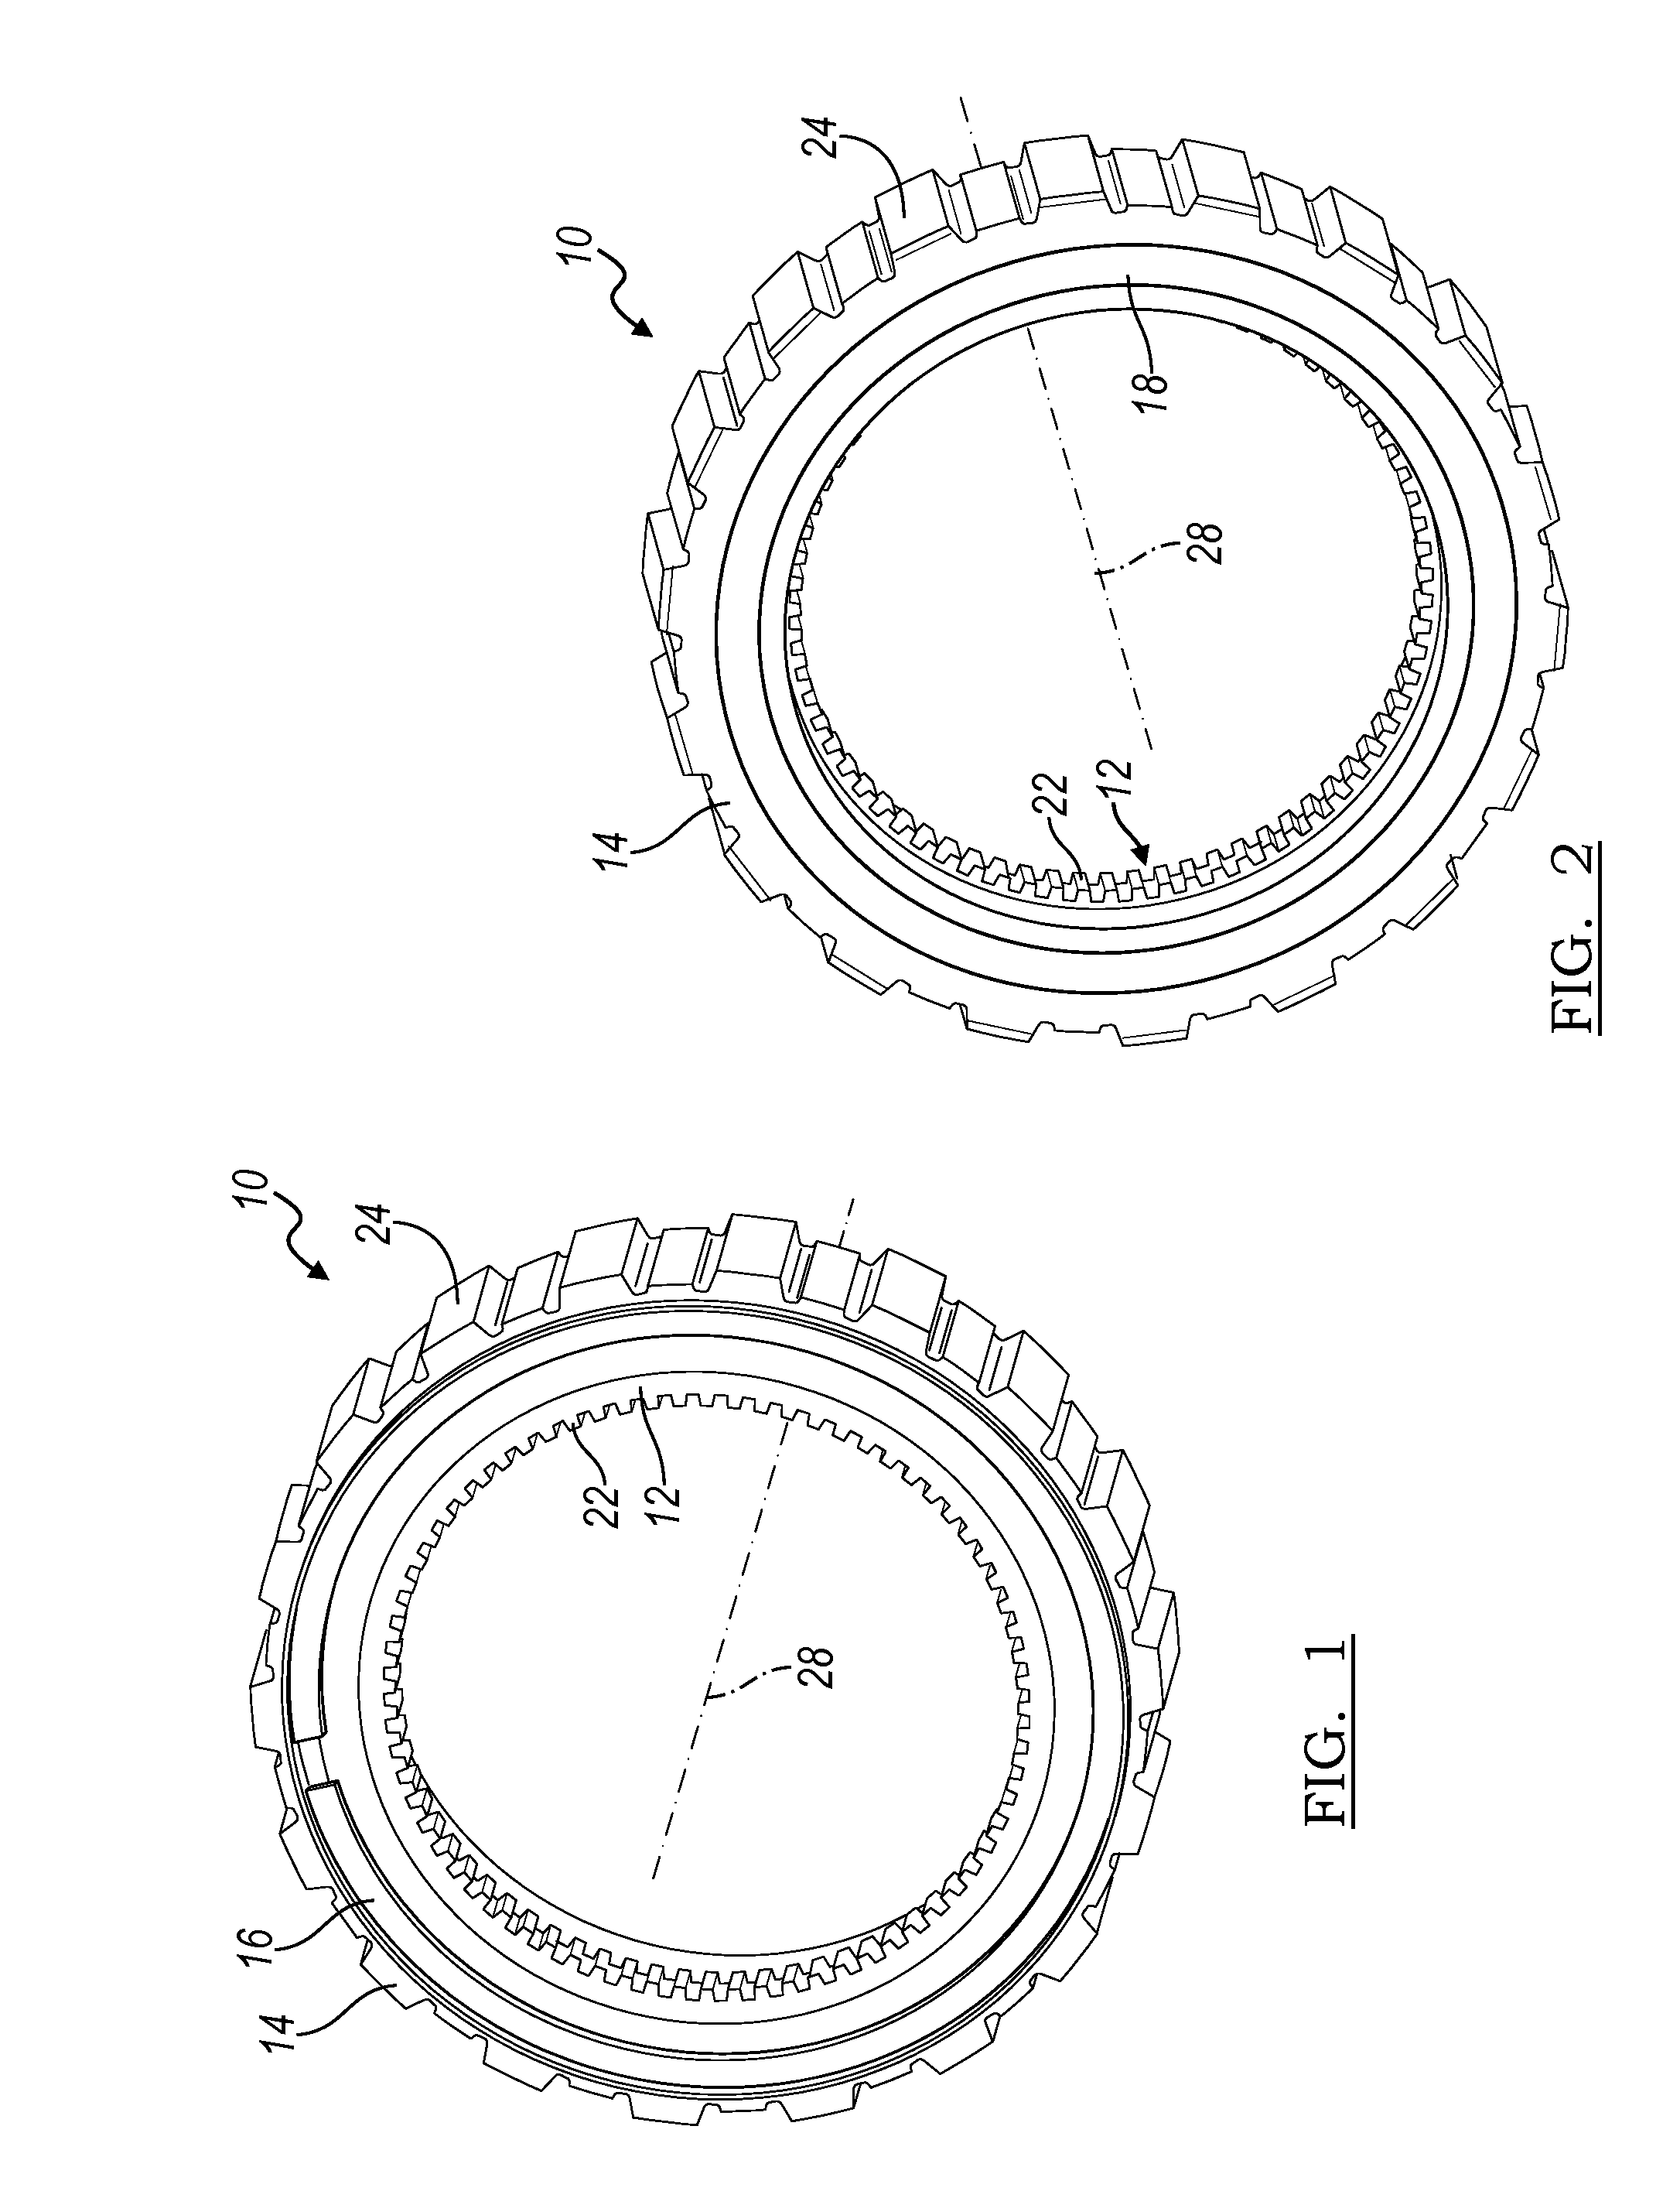 Magnetically Actuated Mechanical Diode